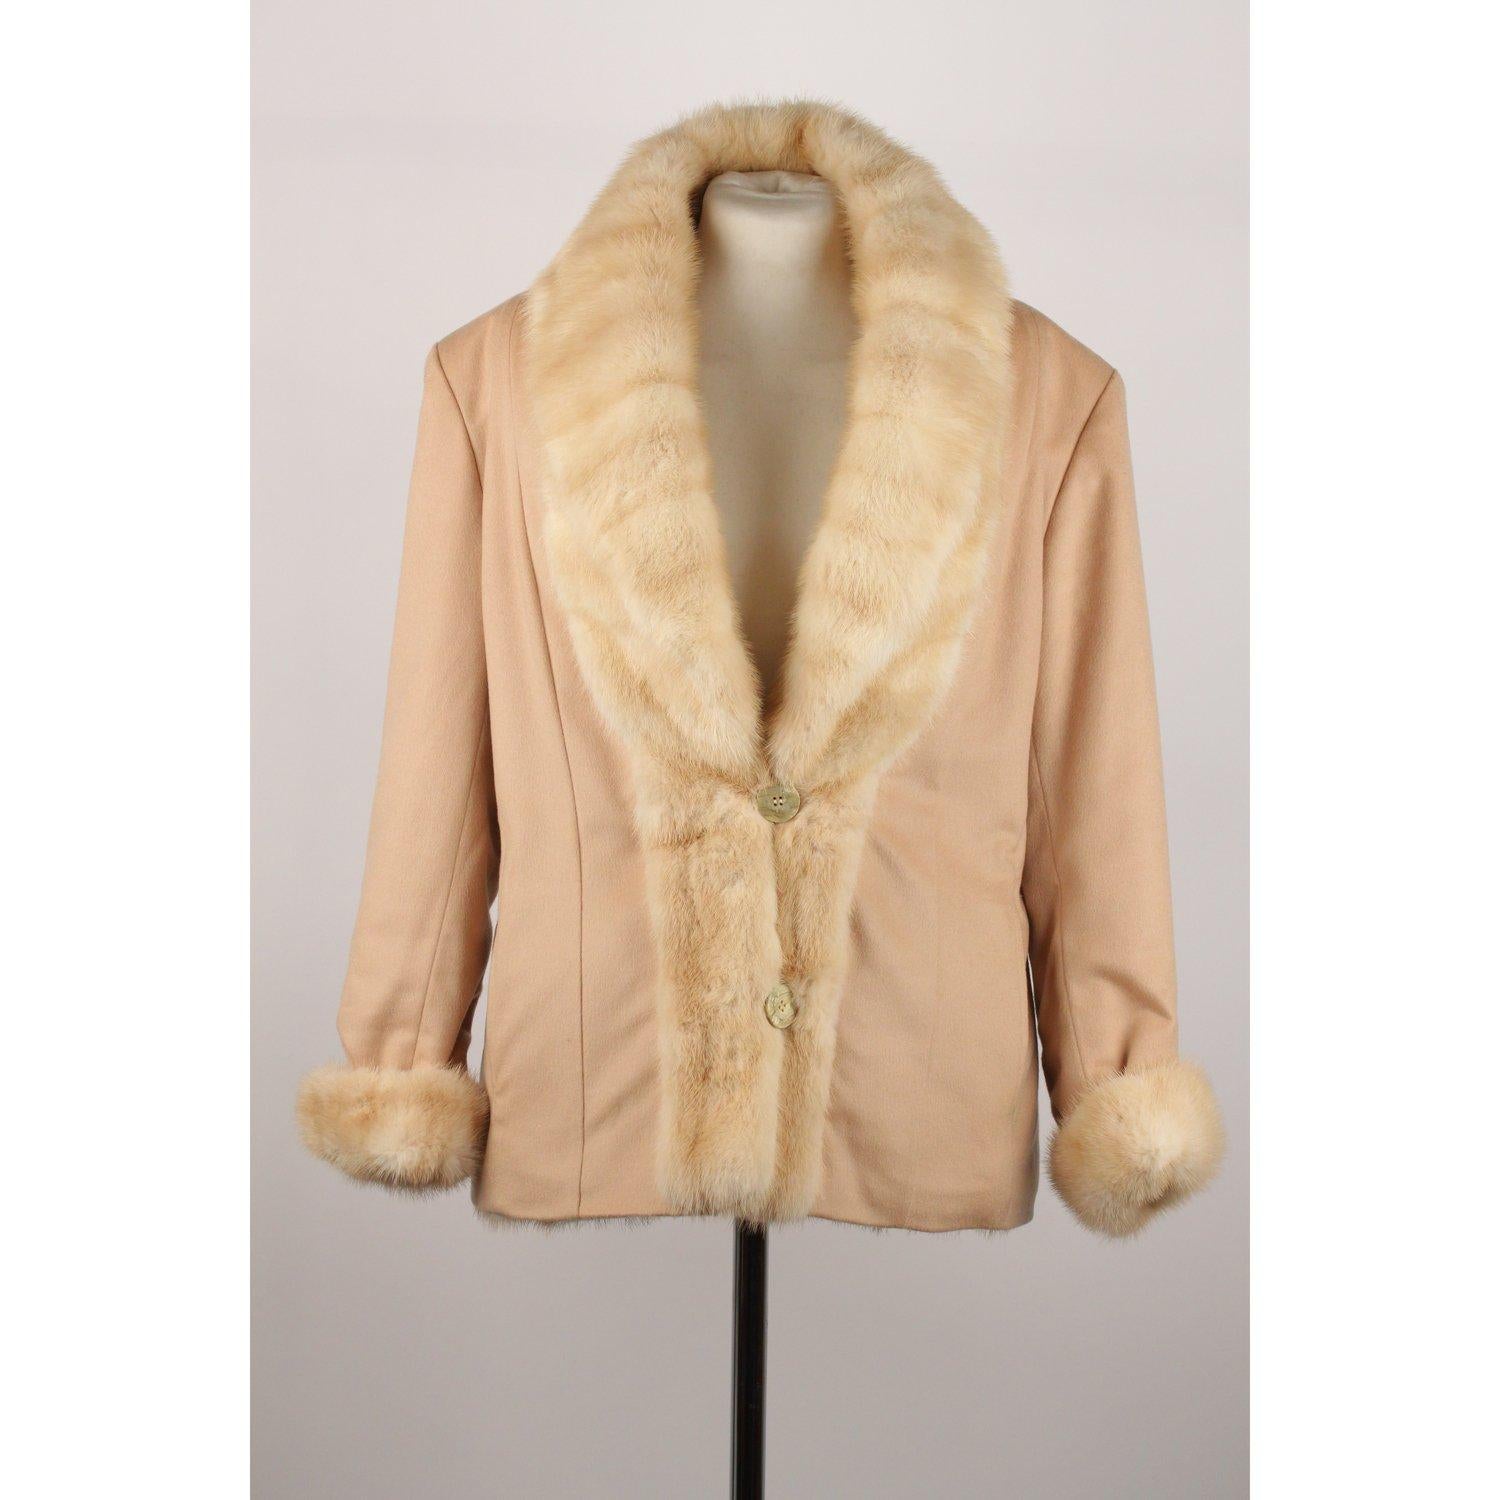  Reversible Jacket with Mink Fur Lining 3